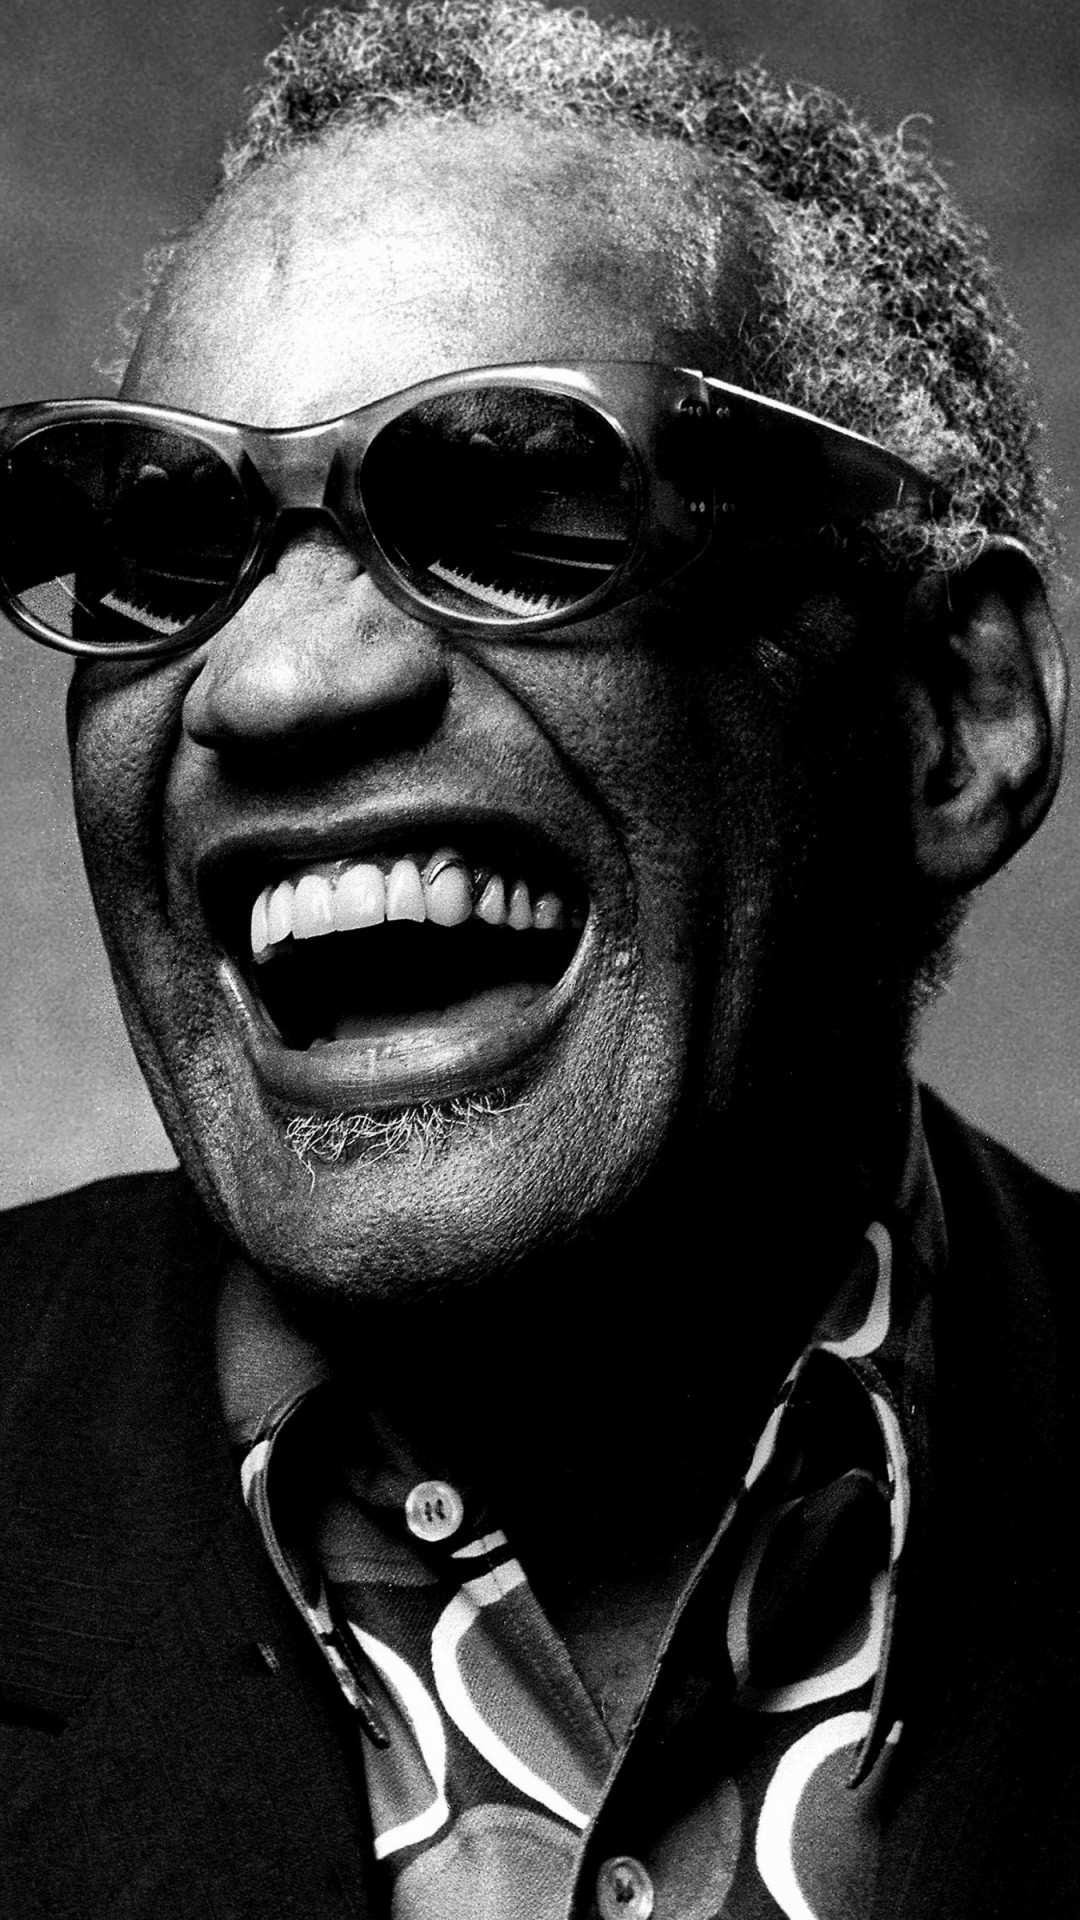 Ray Charles Portrait in Black & White Wallpaper for SAMSUNG Galaxy S4